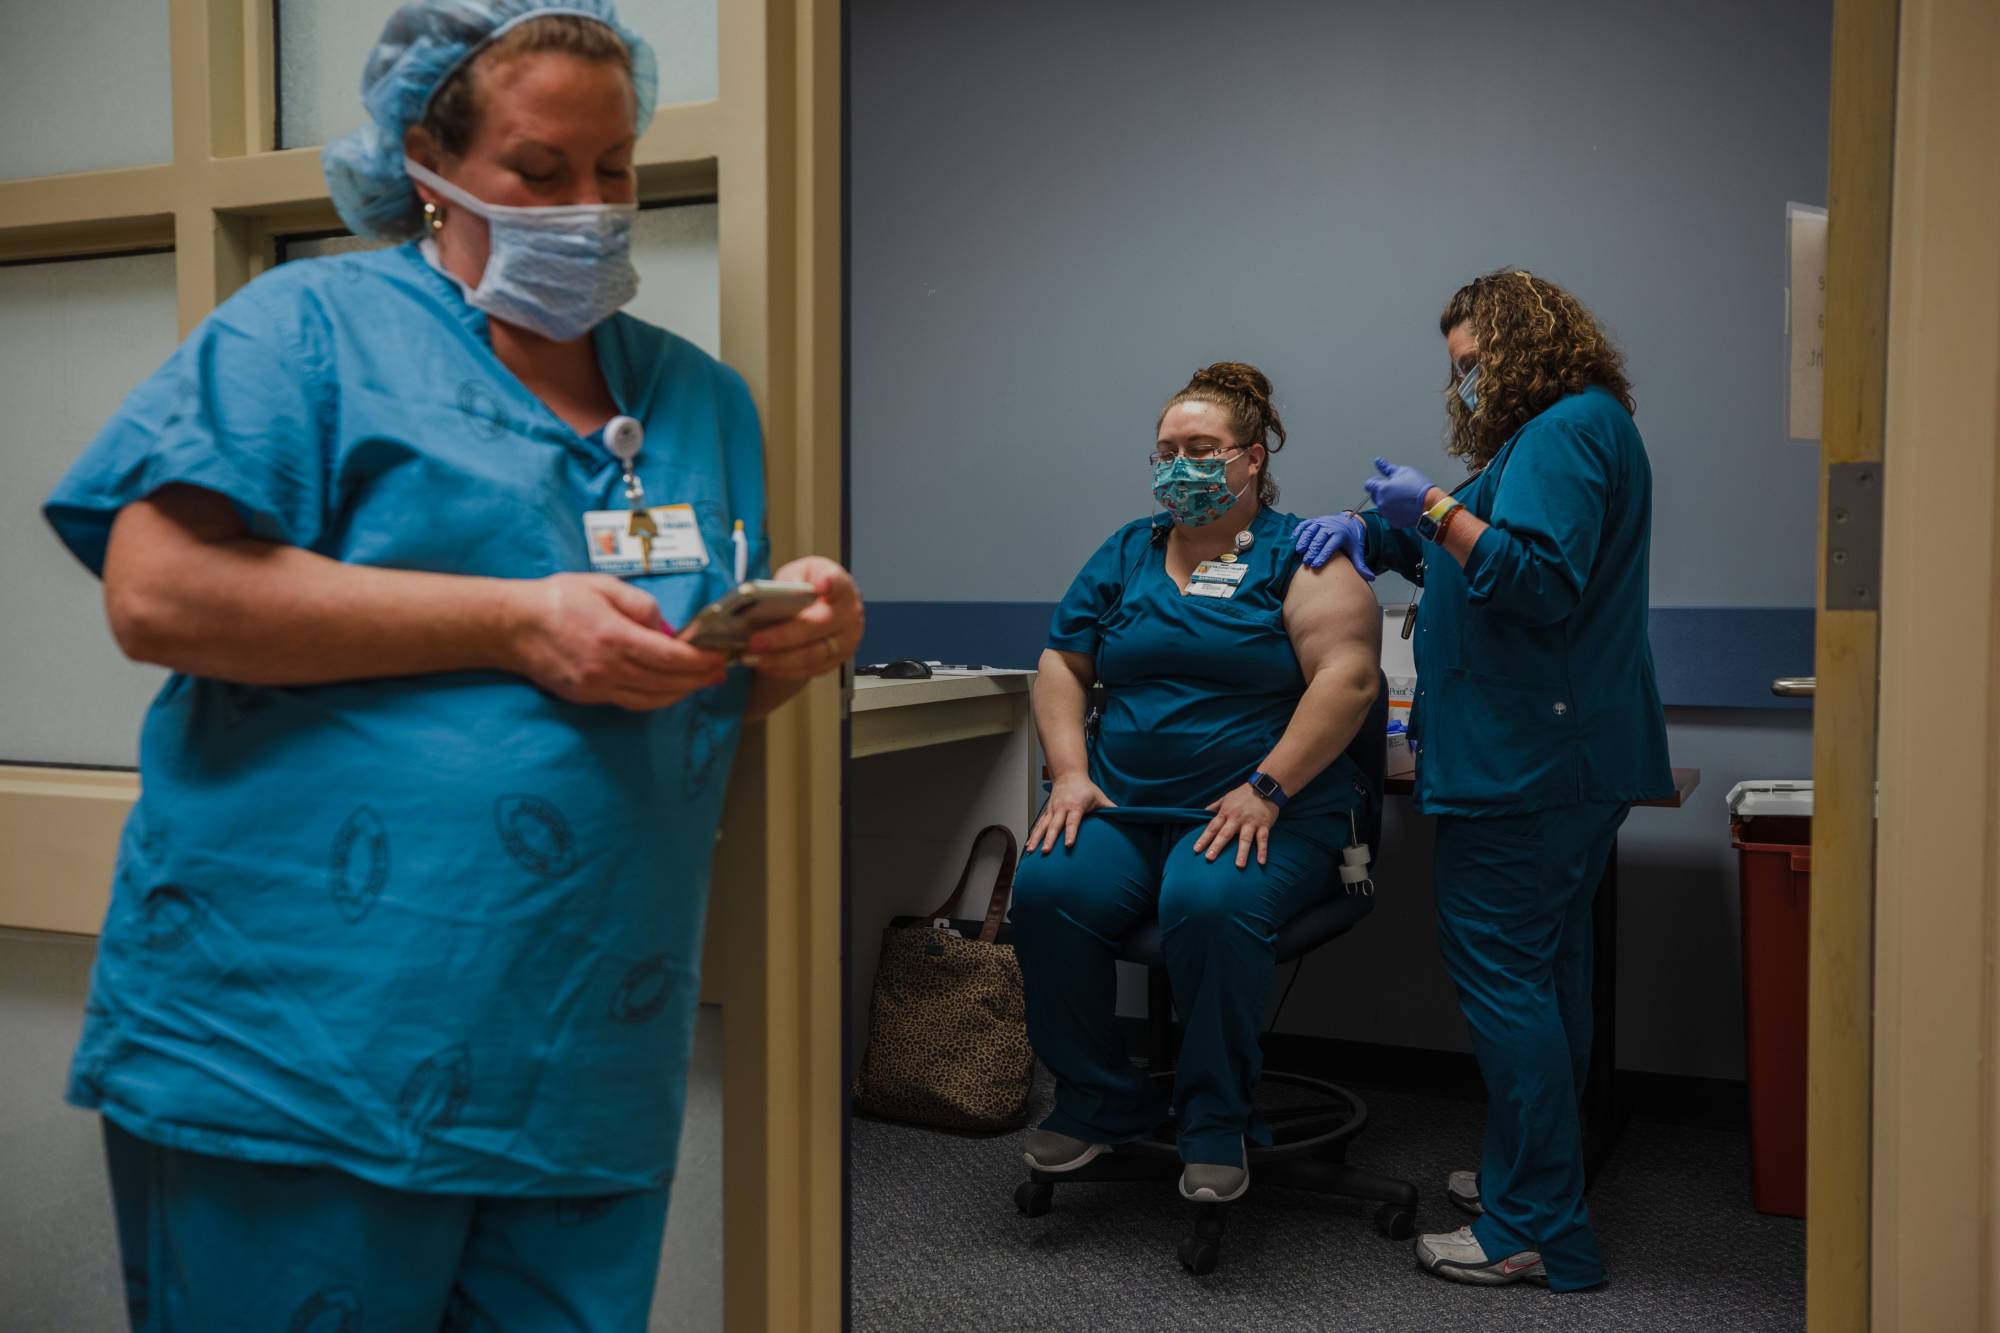 A health care worker receives the Pfizer-BioNTech COVID-19 vaccine at a hospital in Manning, South Carolina, on Thursday. Pfizer Inc. filed Friday with authorities in Tokyo for a fast-track approval of the vaccine, marking the first such application in Japan. | BLOOMBERG